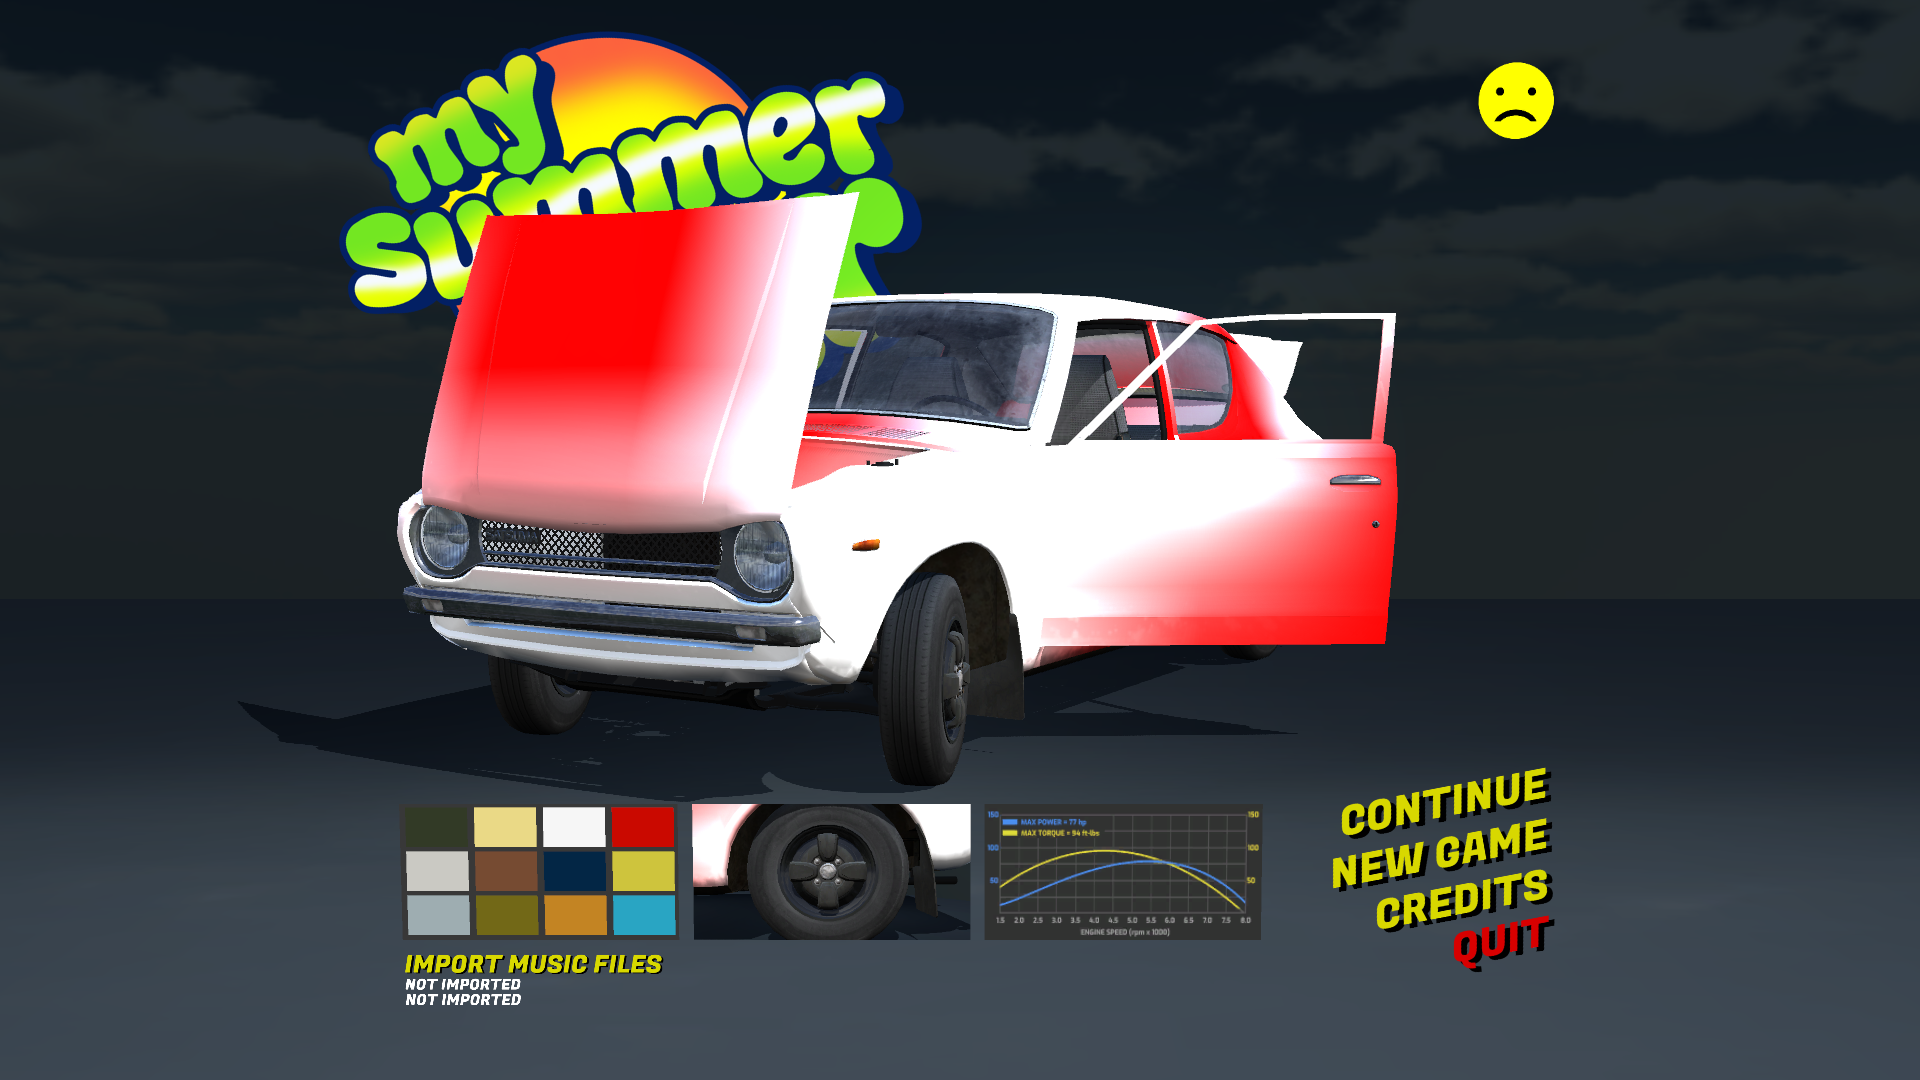 MY SUMMER CAR GUIDE 2: ELECTRIC BOOGALOO, My Summer Car Wiki